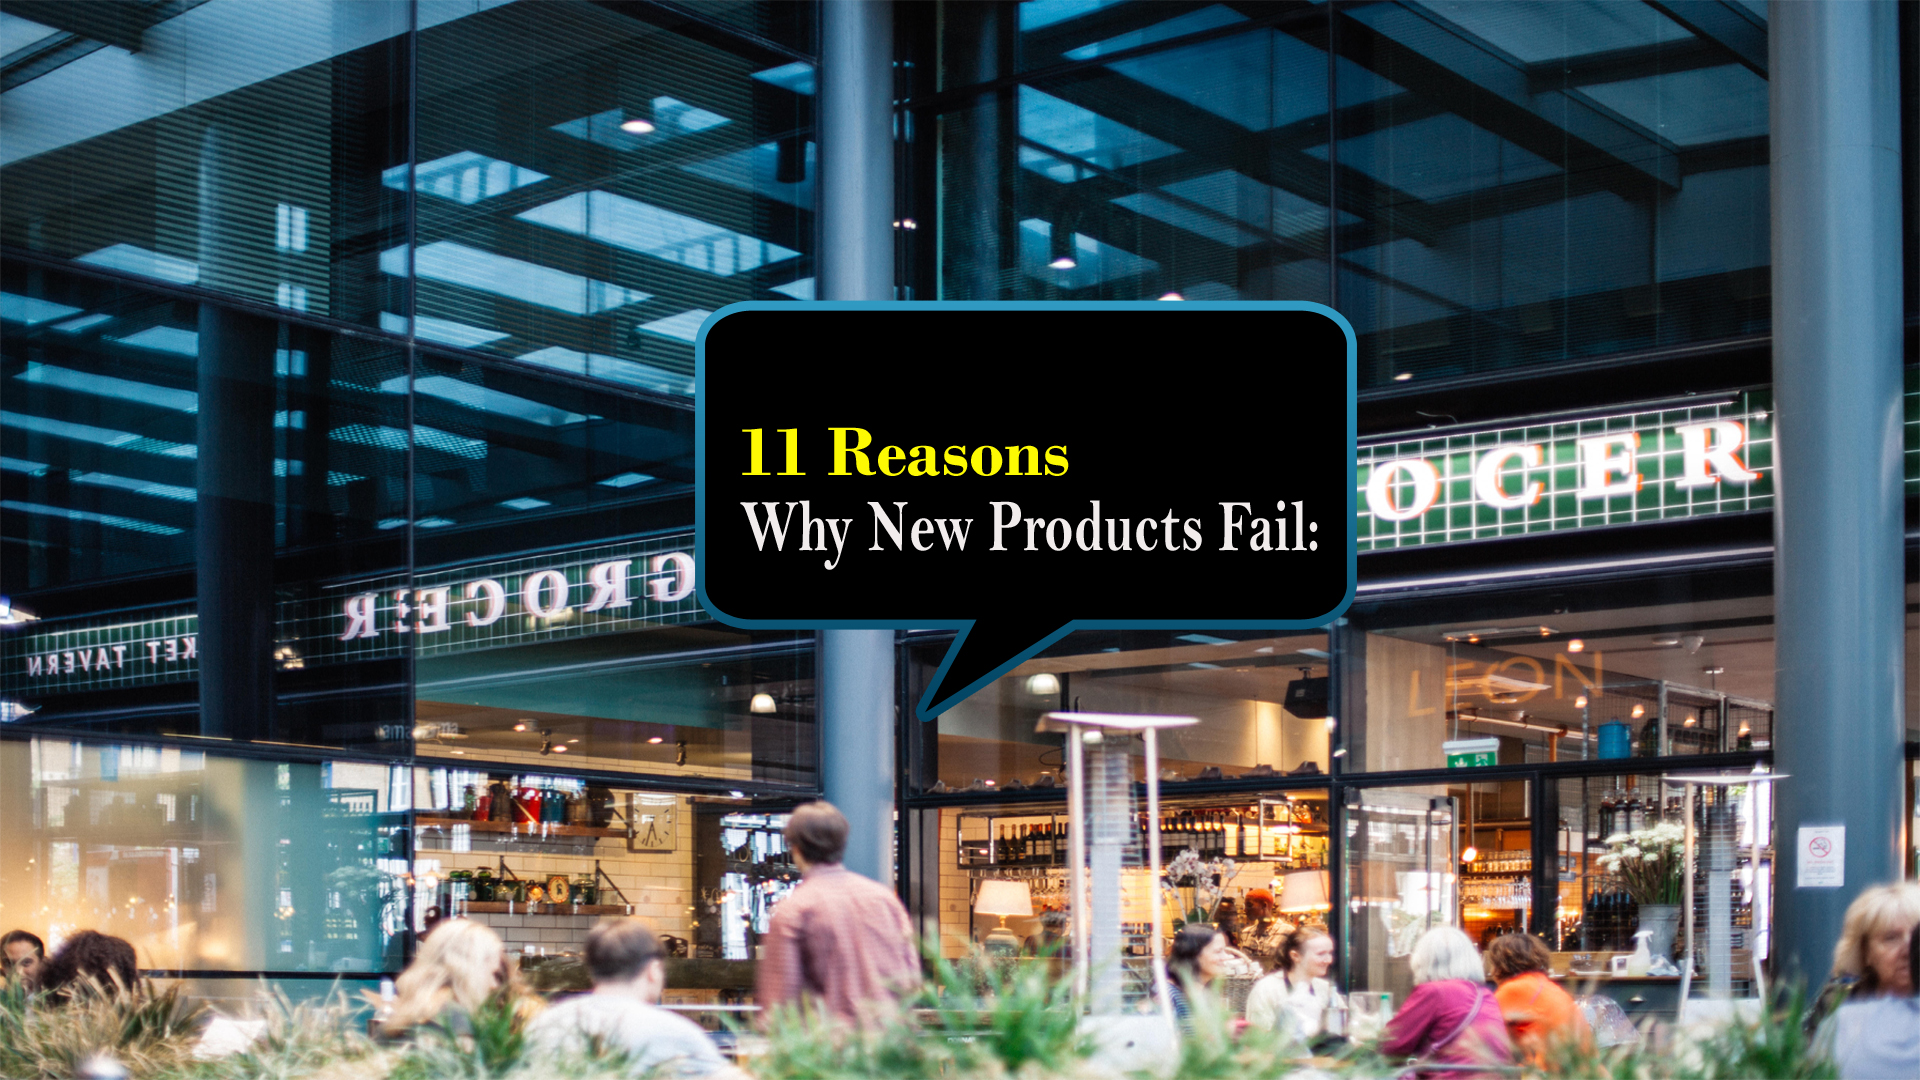 11 Reasons Why New Products Fail